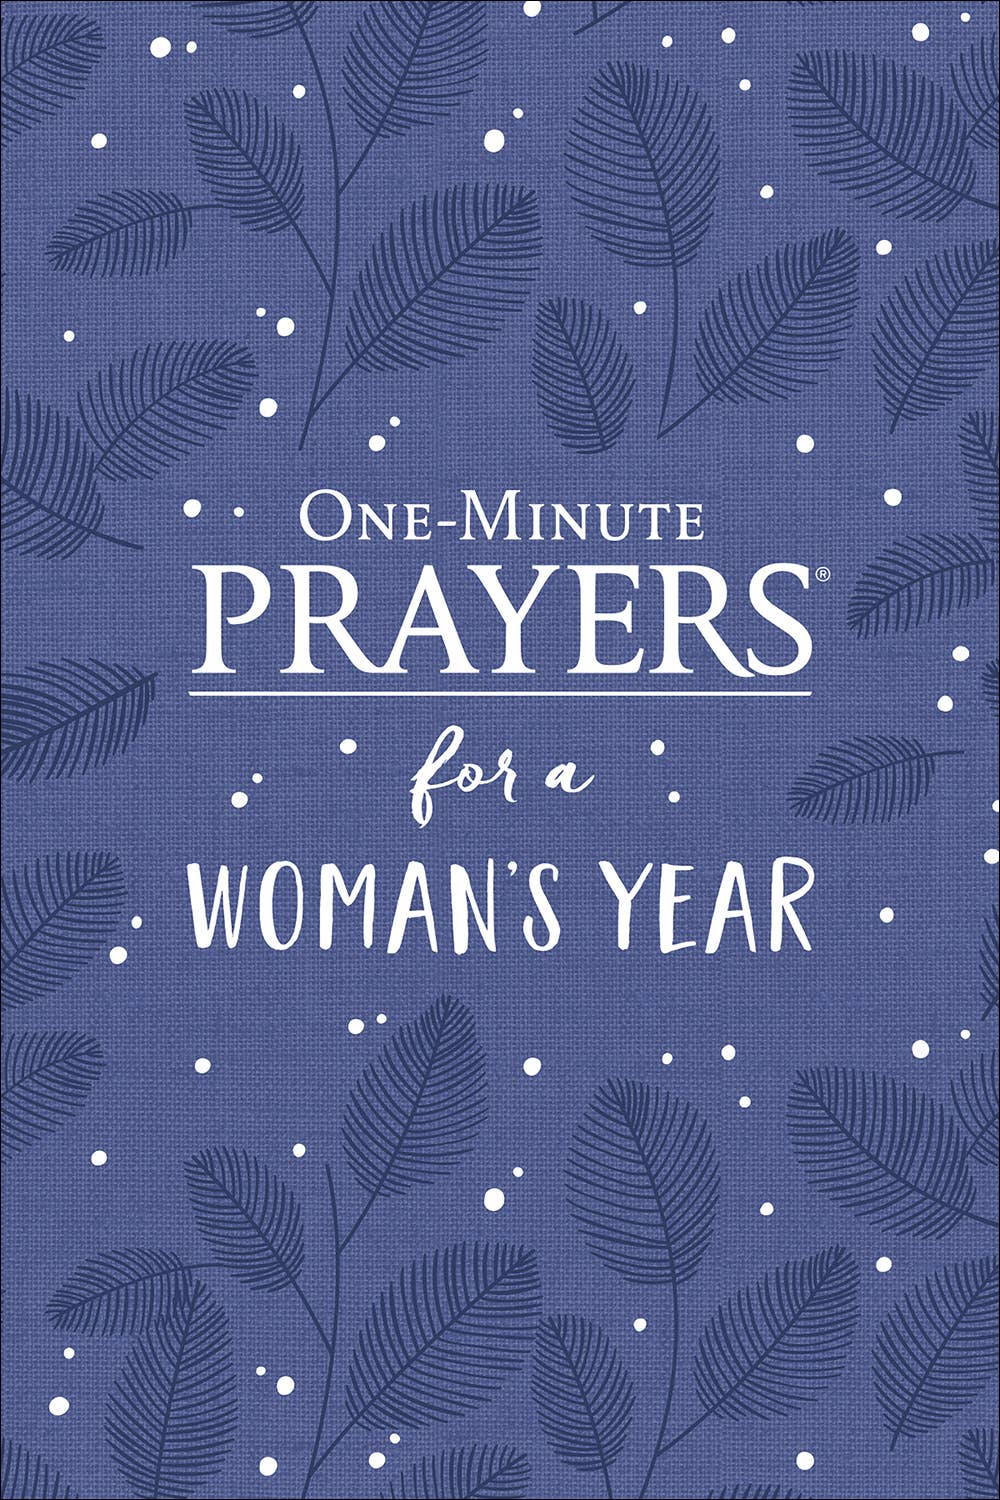 One Minute Prayers for a Woman's Year, Book,  - Prayer